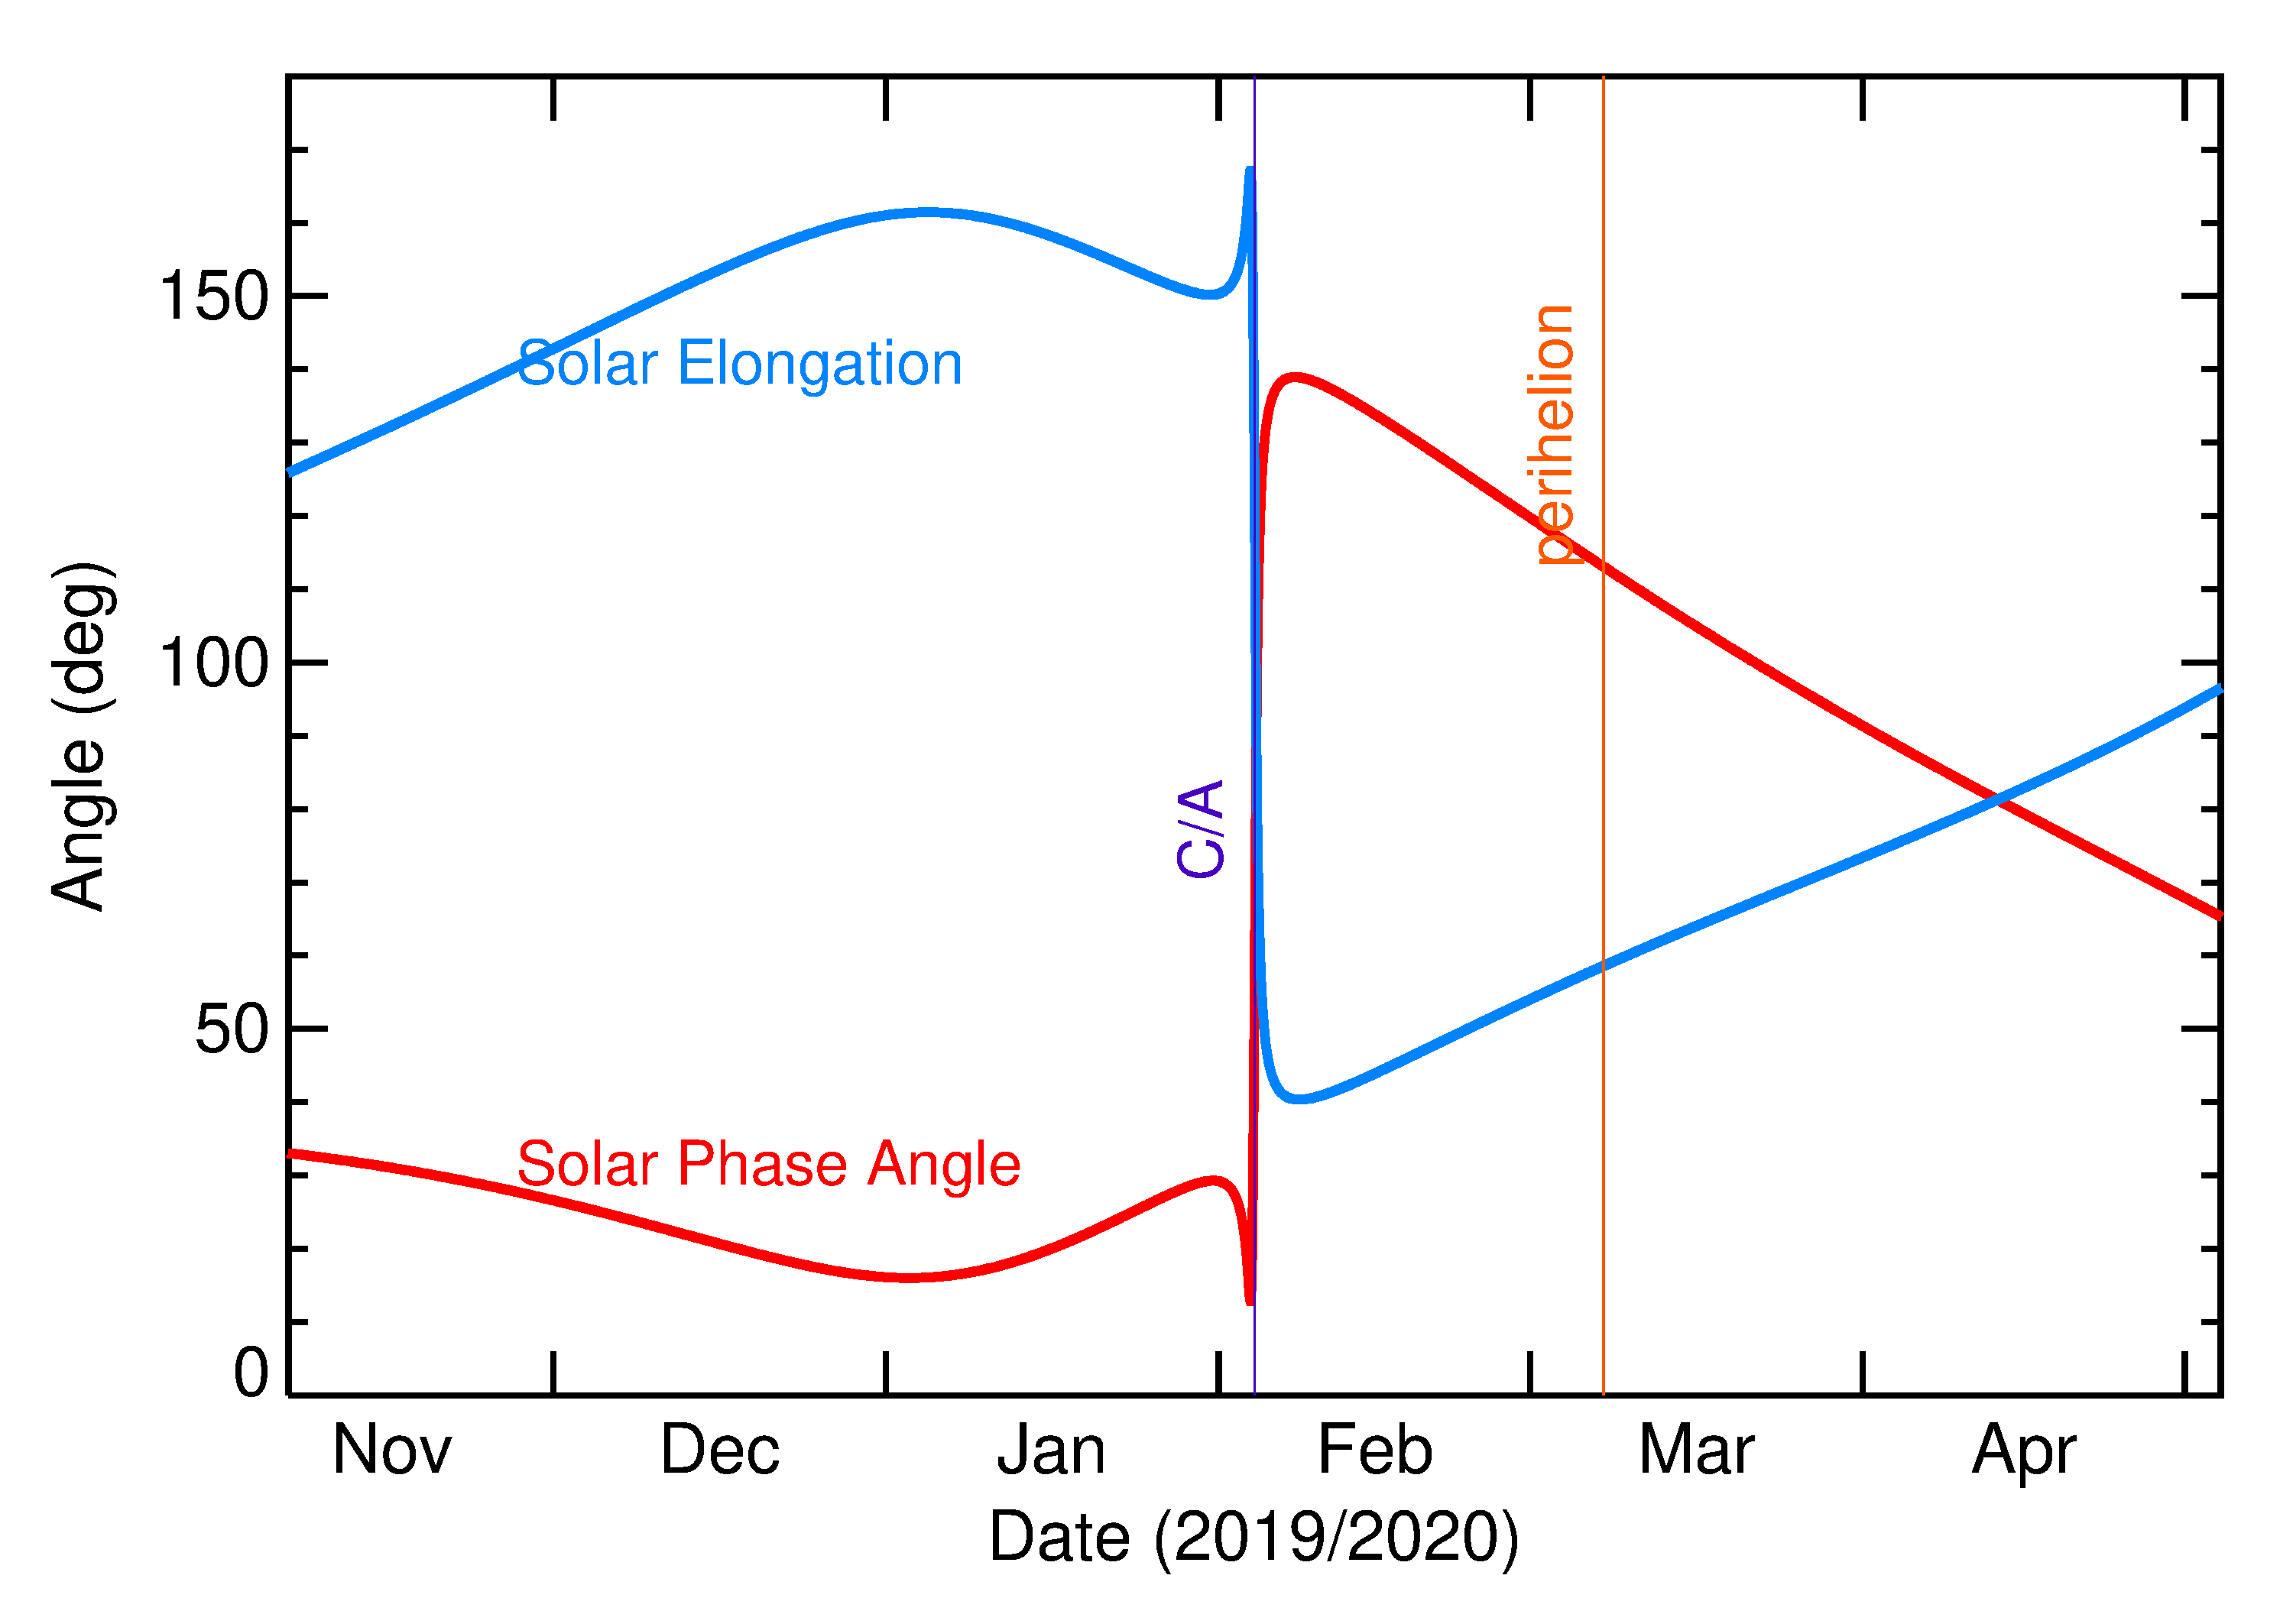 Solar Elongation and Solar Phase Angle of 2020 BT14 in the months around closest approach